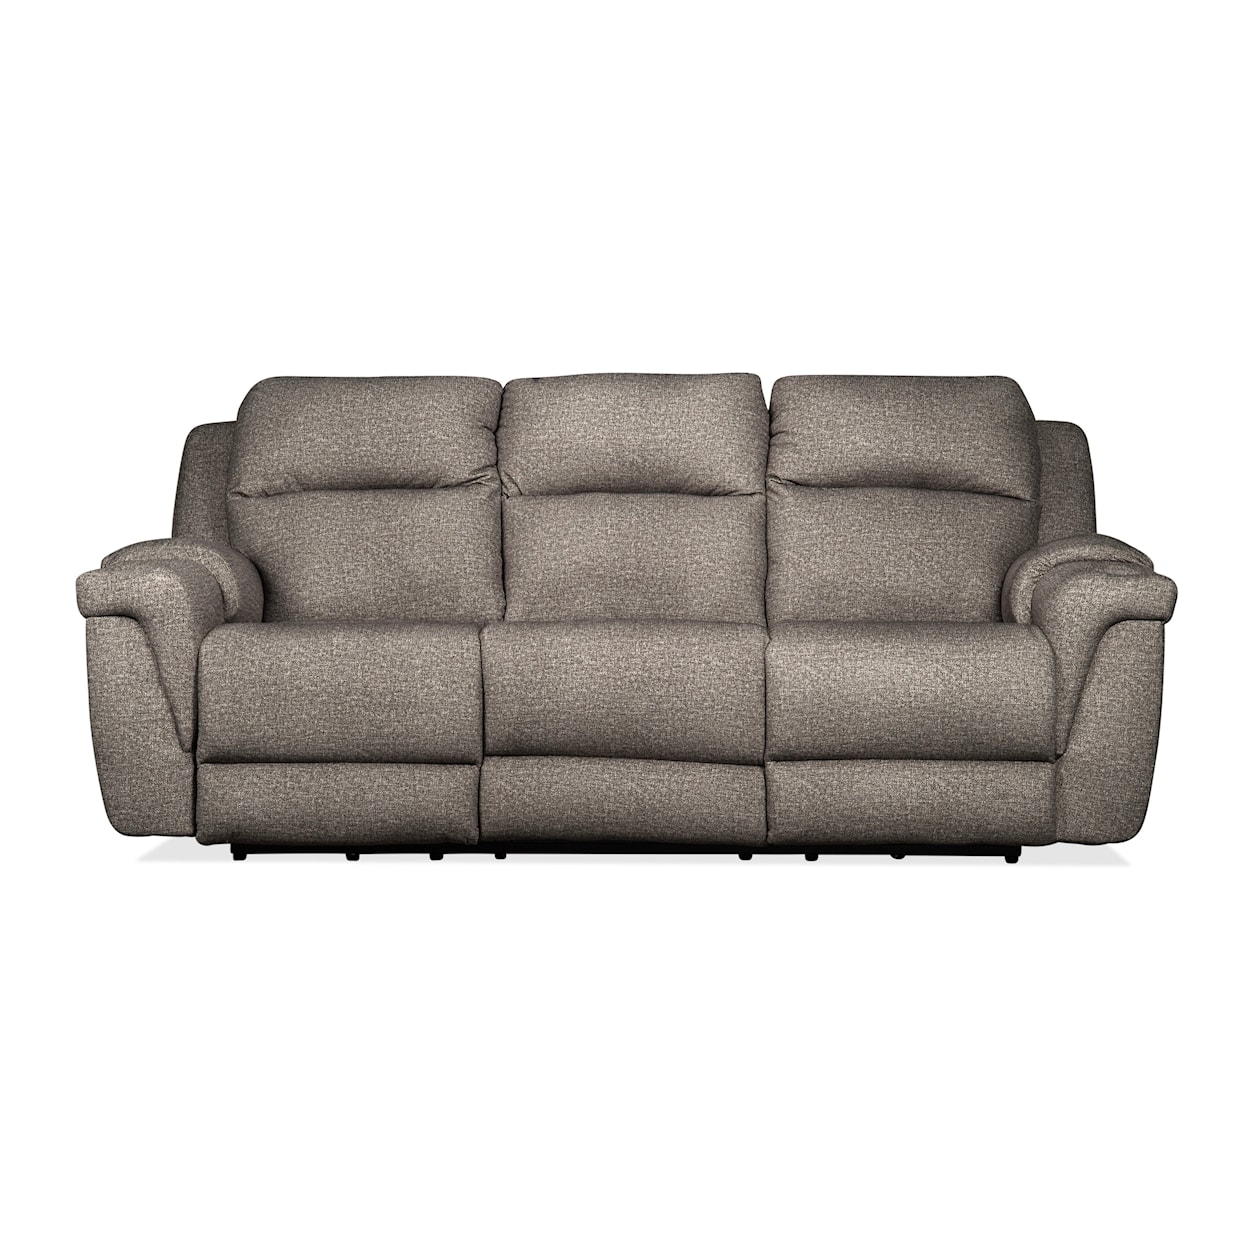 Southern Motion William William Power Sofa